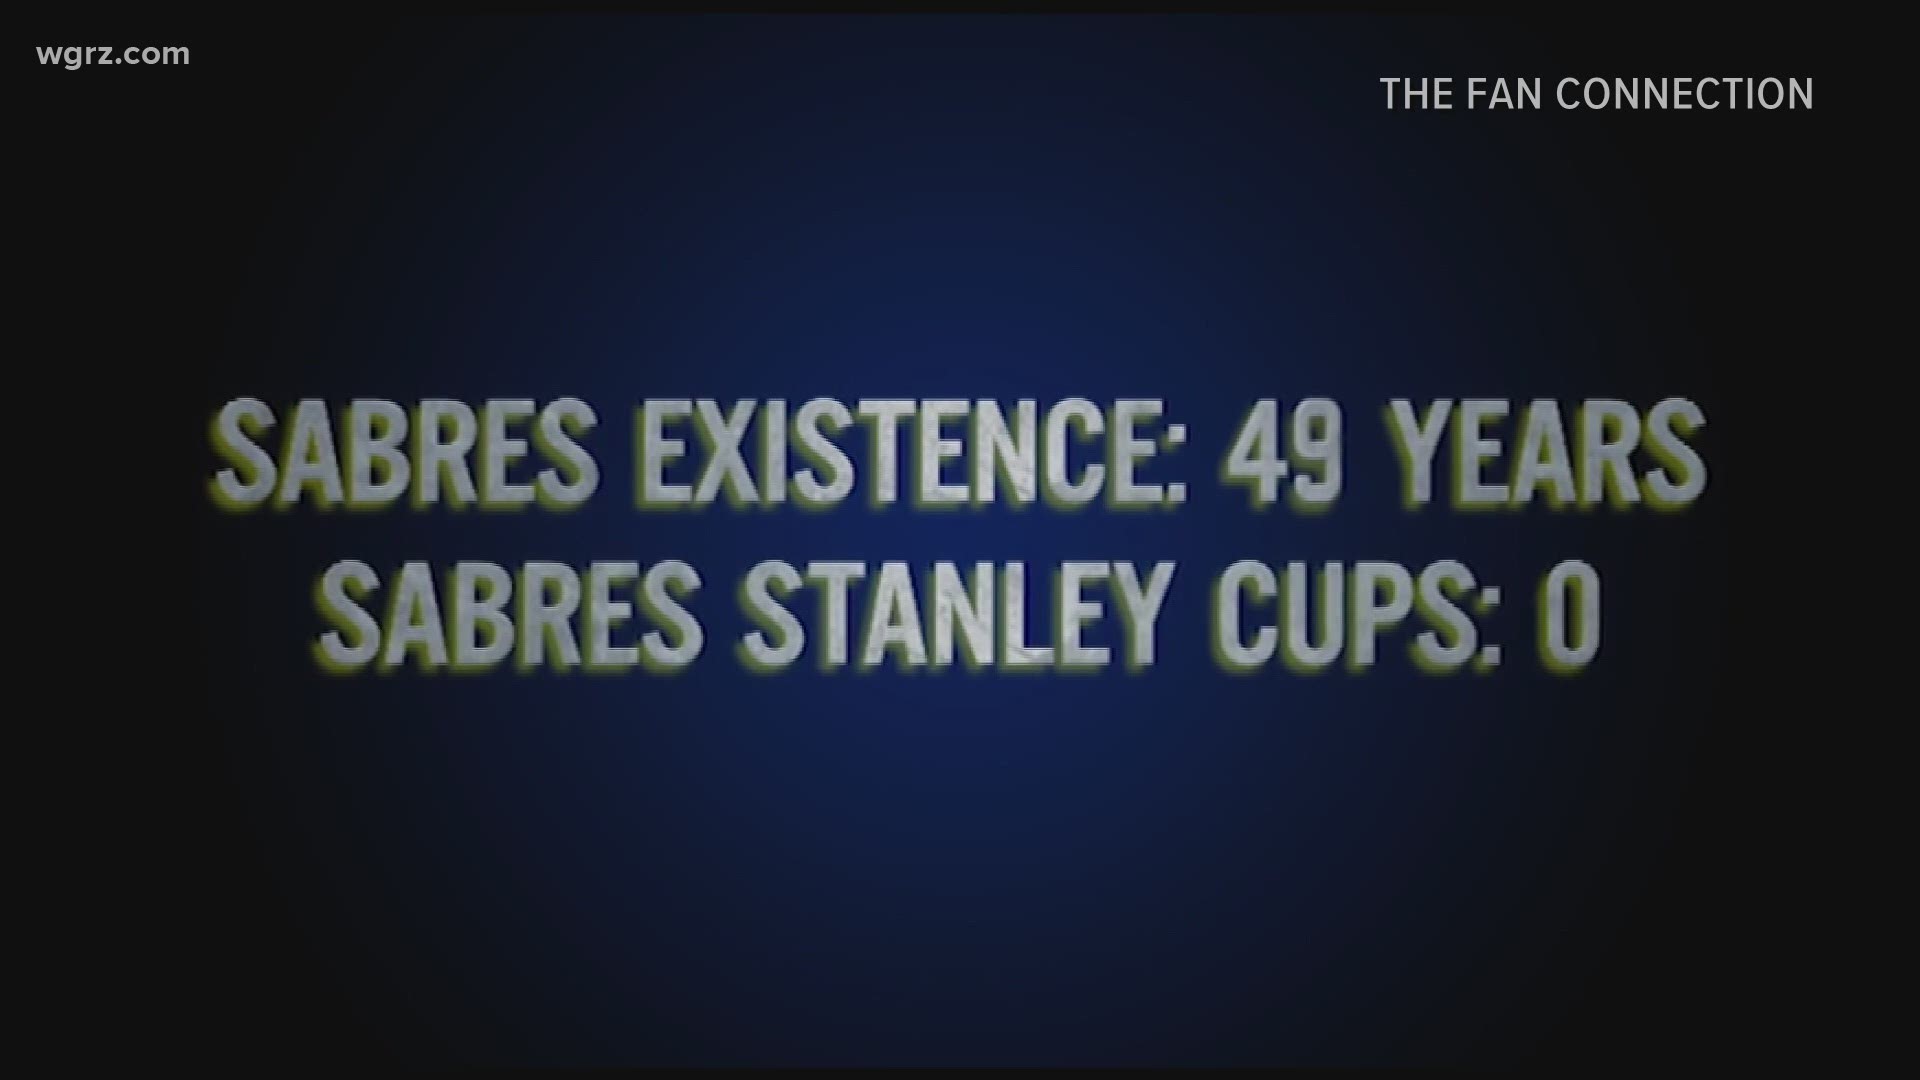 Sabres fan documentary streaming